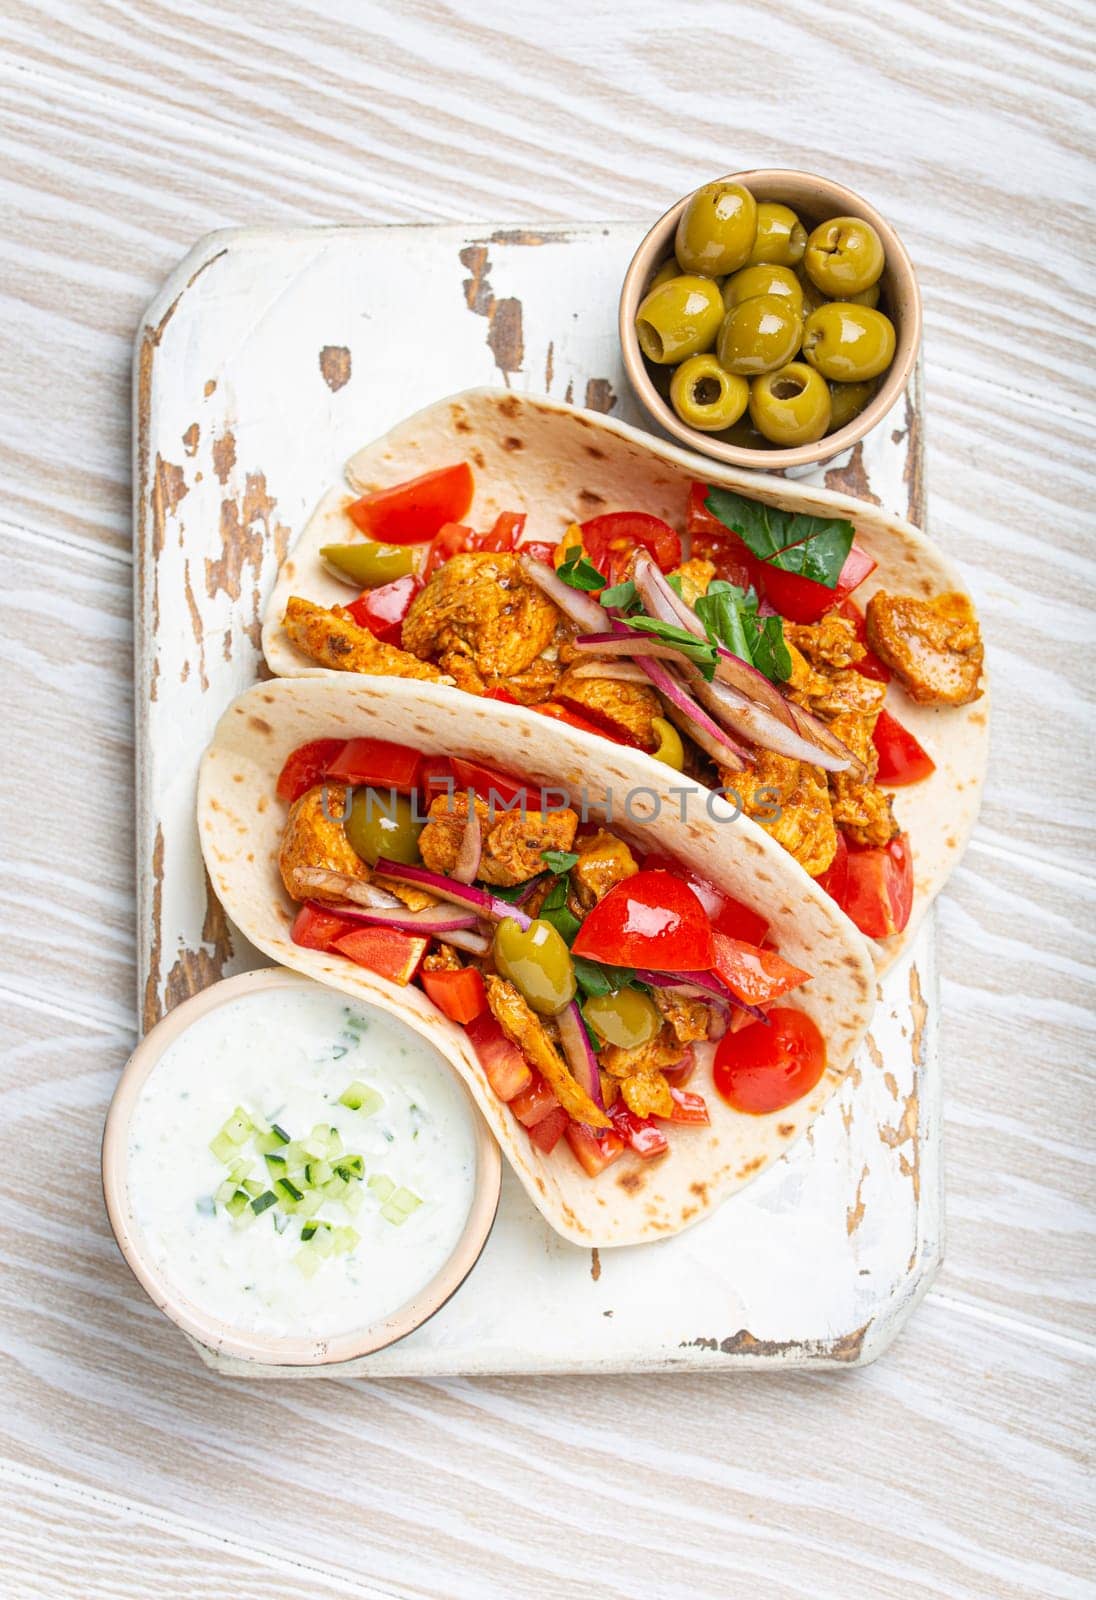 Traditional Greek Dish Gyros: Pita bread Wraps with vegetables, meat, herbs, olives on rustic wooden cutting board with Tzatziki sauce, olive oil top view, white wooden summer background.